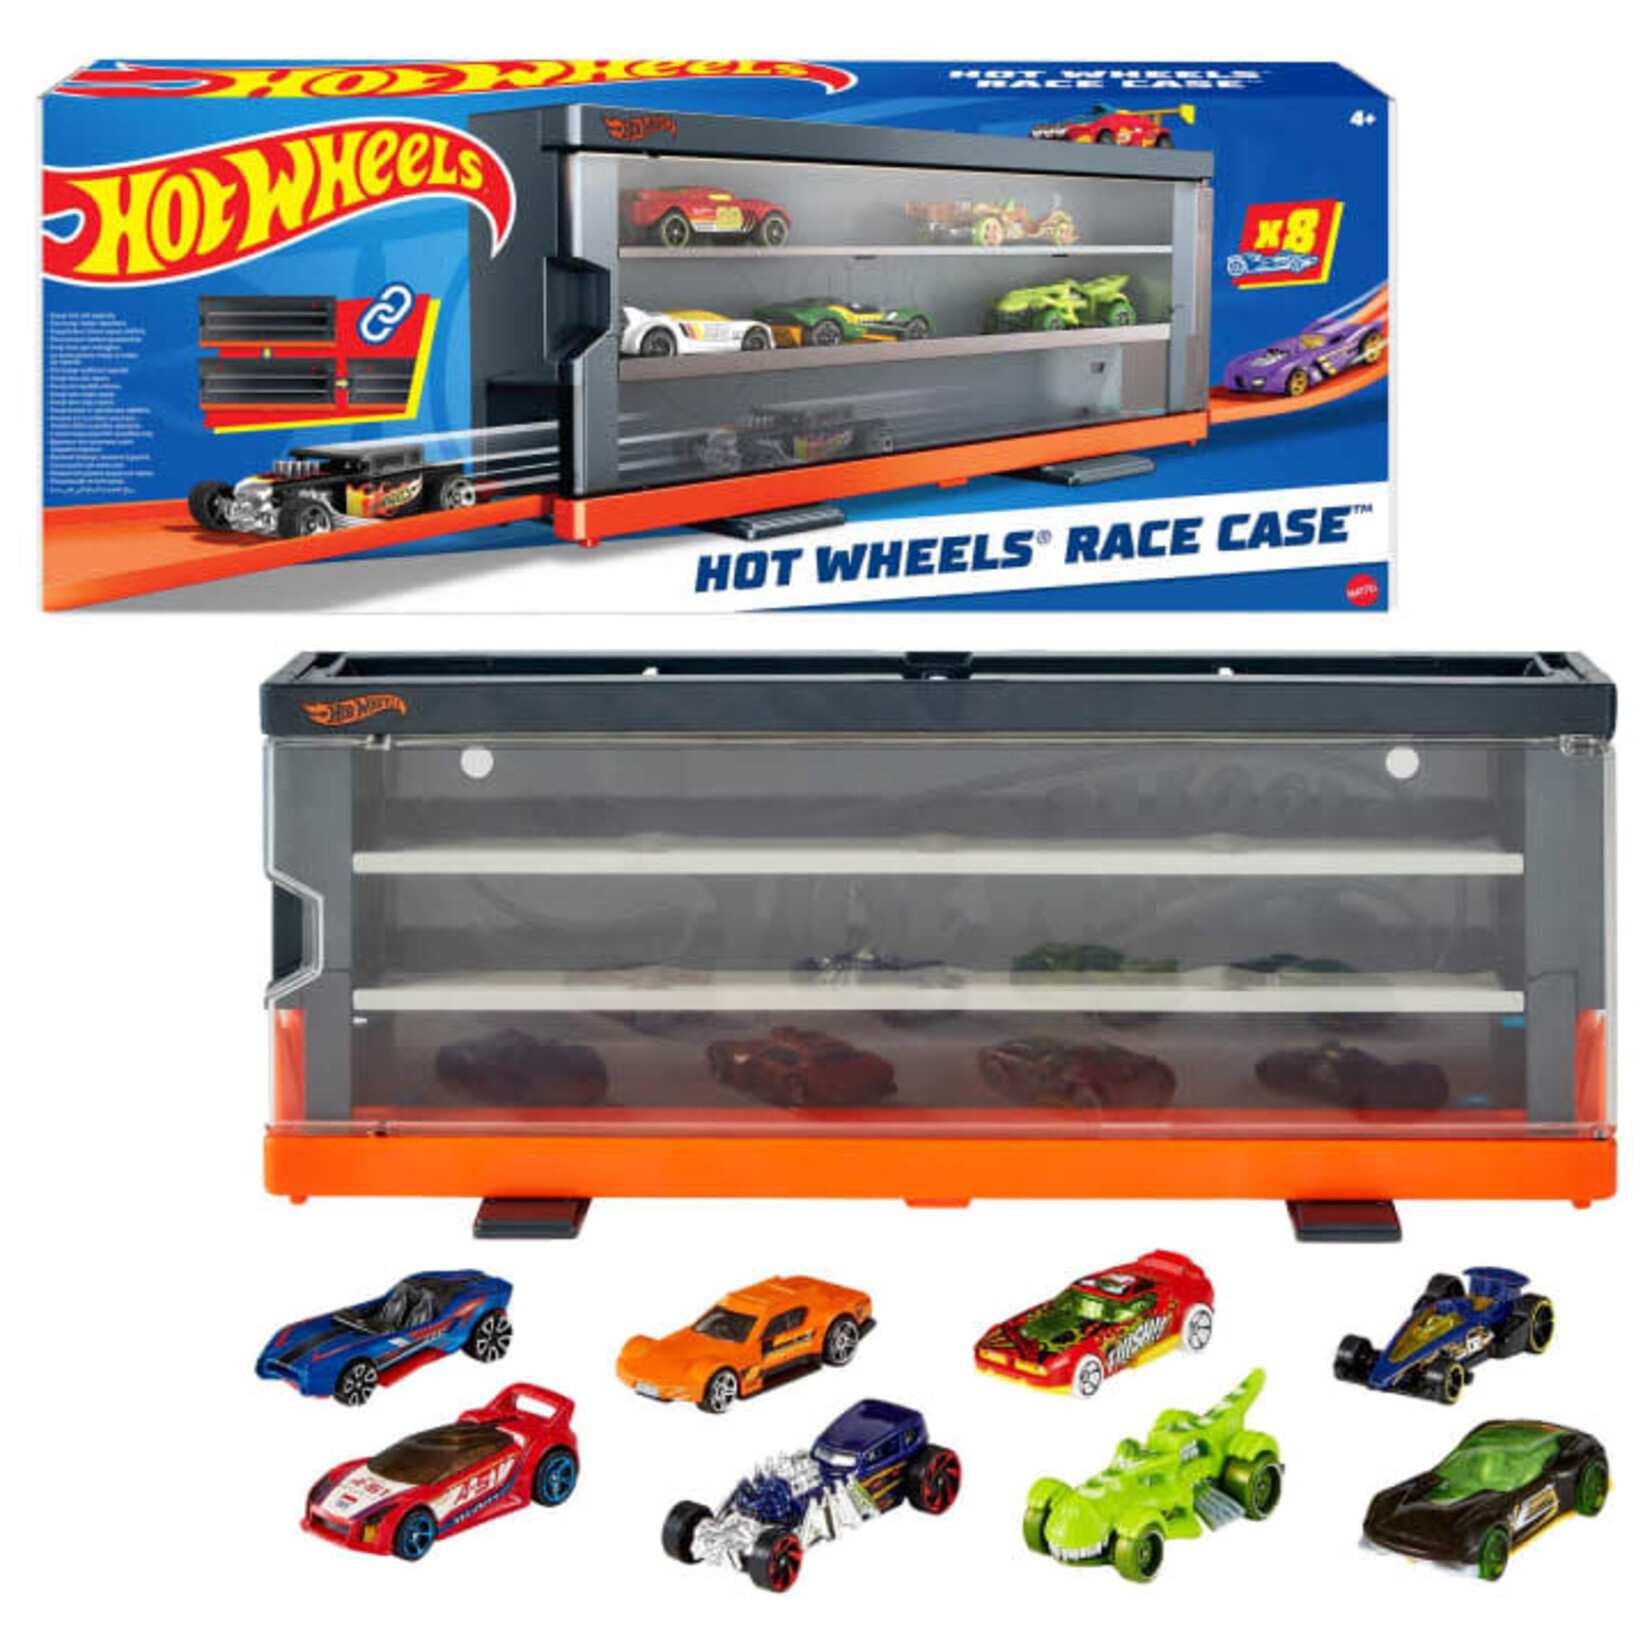 Mattel MAT-HFC89 Hot Wheels Interactive Track Display Case With 8 Cars 1:64 Scale Storage